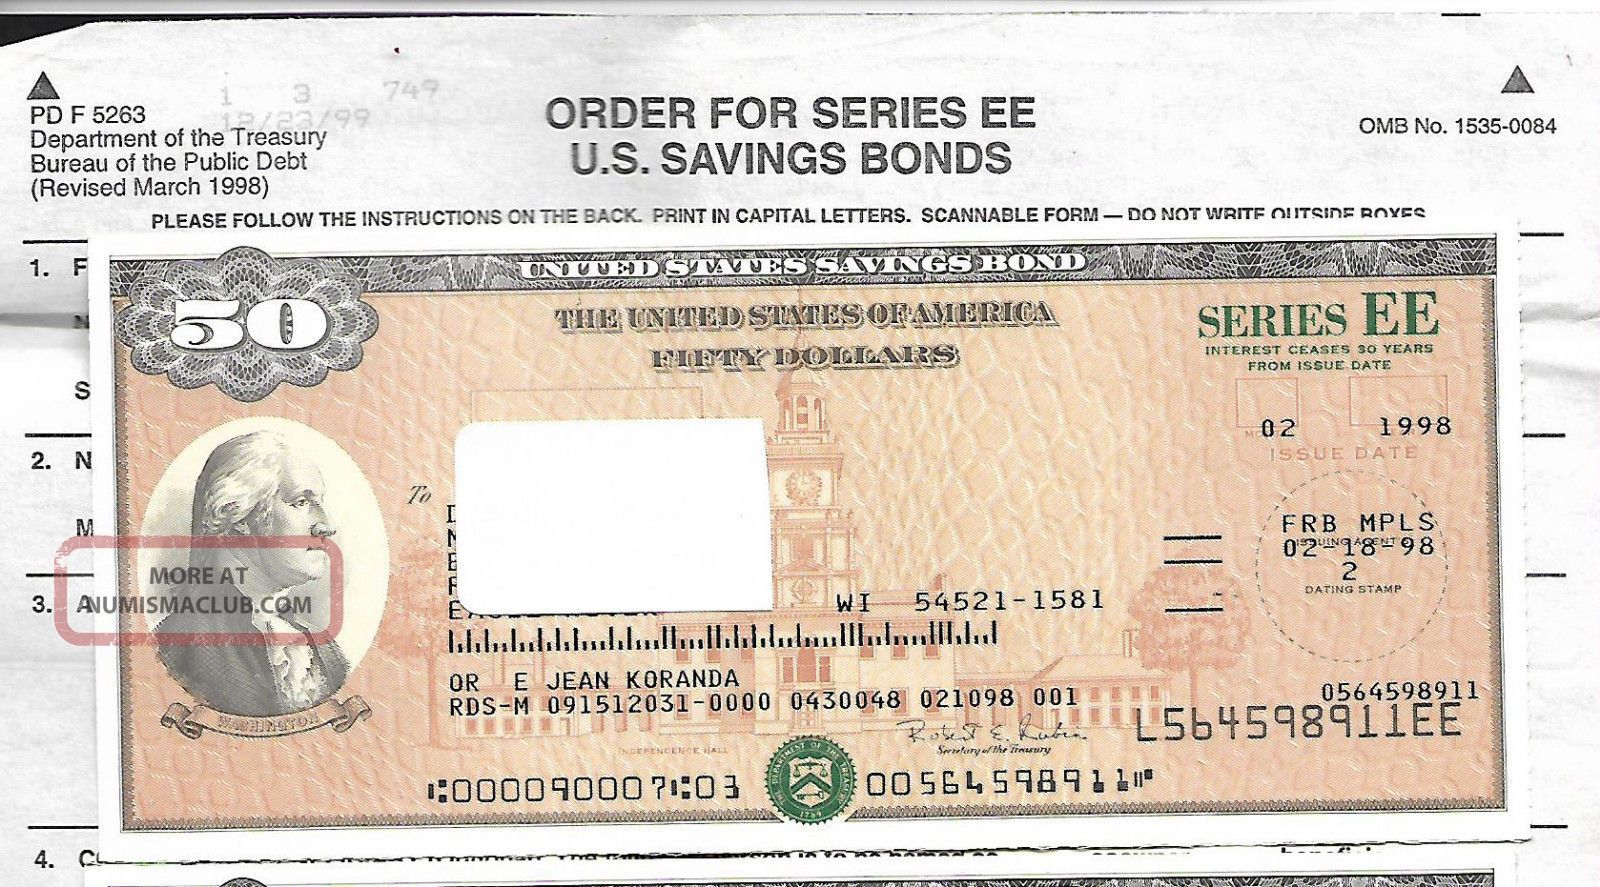 Where to find the bond serial number